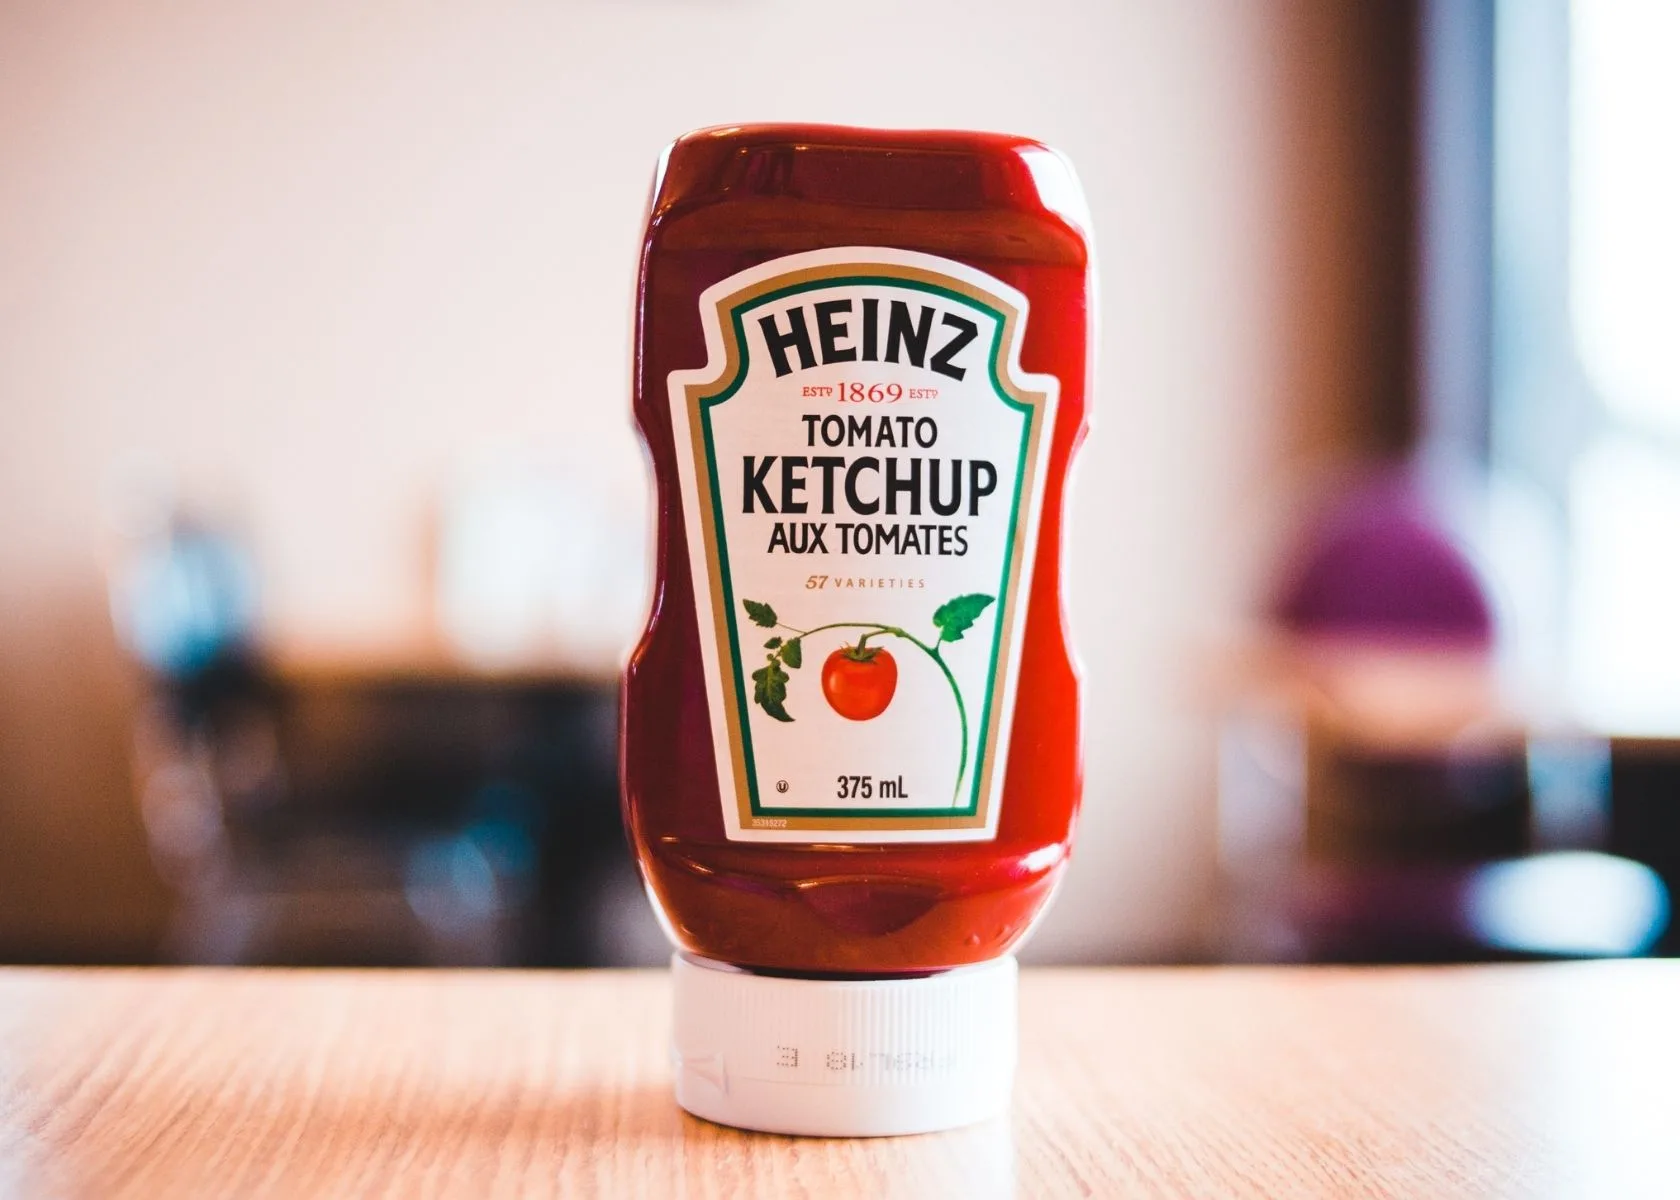 Heinz ketchup bottle stands on its cap on table in a restaurant.